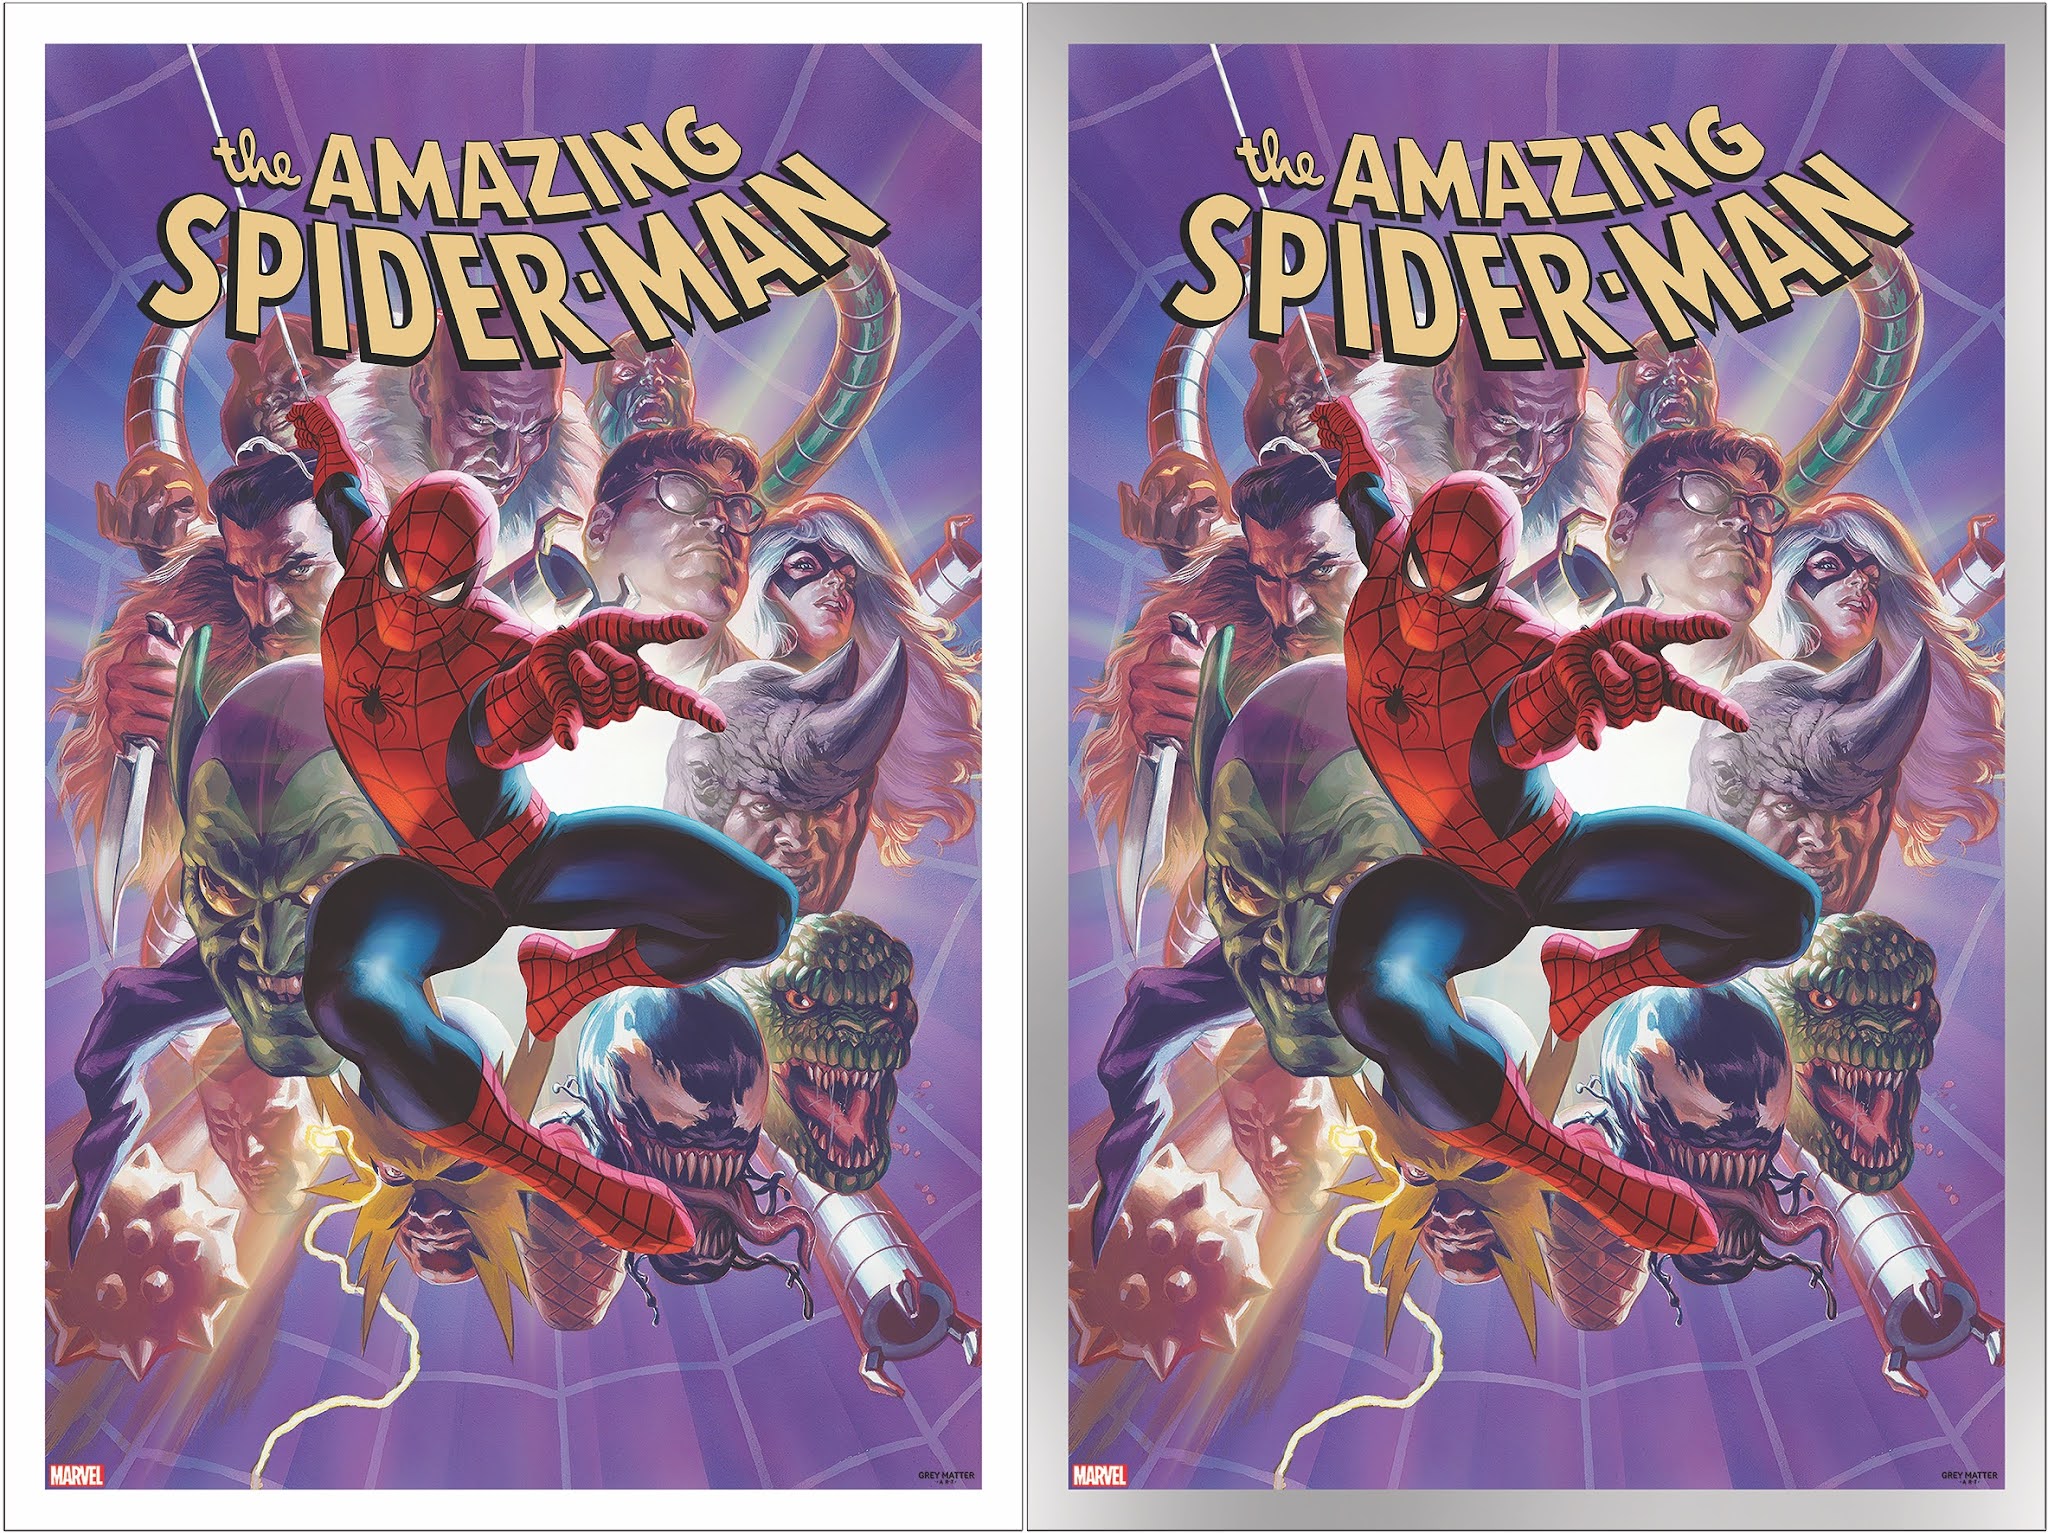 INSIDE THE ROCK POSTER FRAME BLOG: Alex Ross Amazing Spider-Man #33 &  Wolverine #1 Comic Book Cover Prints Release